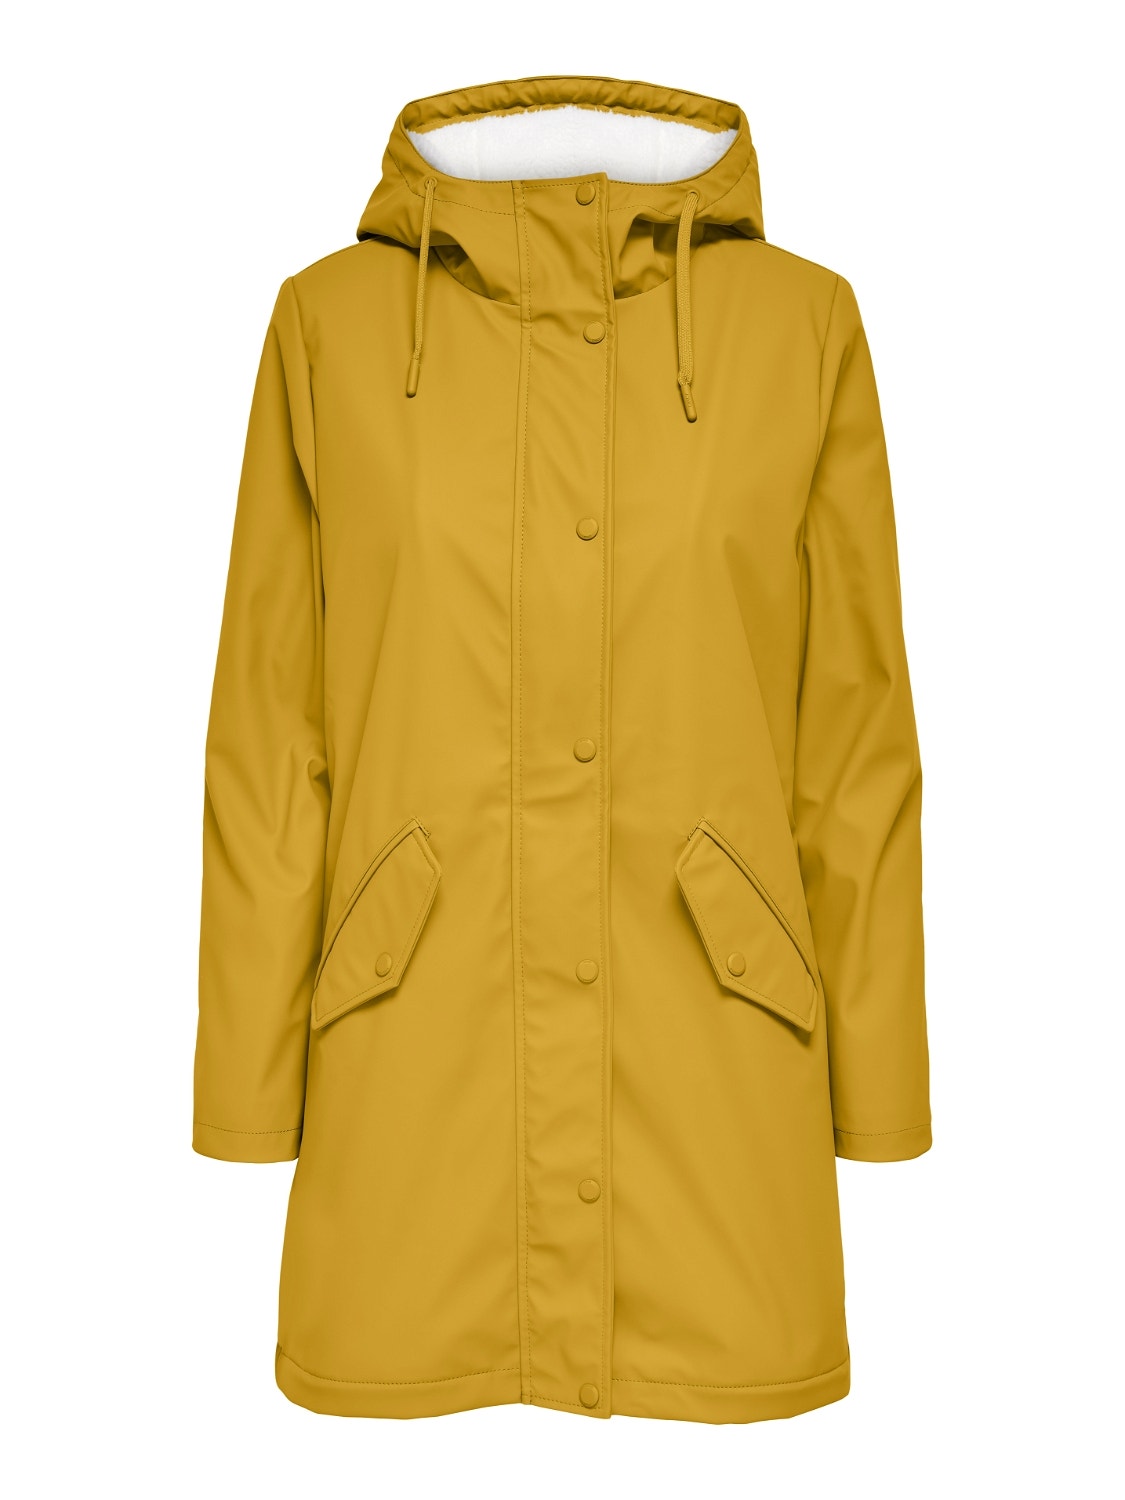 ONLY Rain jacket with teddy lining -Tawny Olive - 15206116